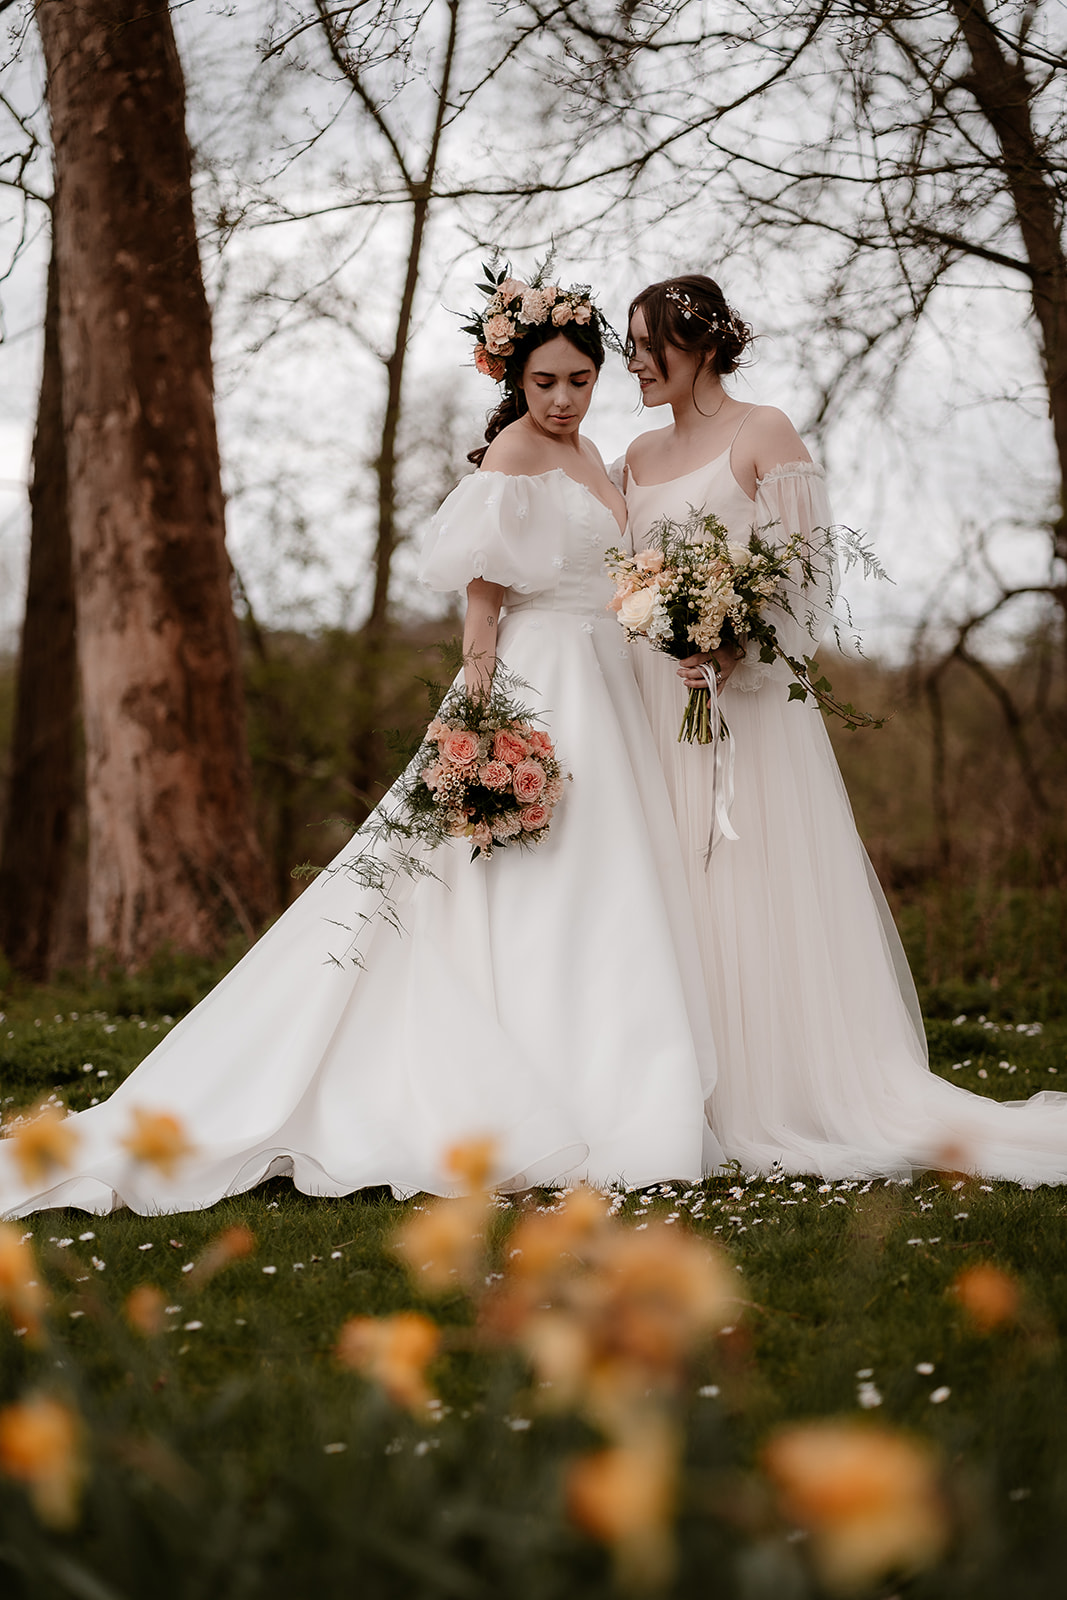 Two brides stand together among the daffodils at Mapledurham House wedding venue